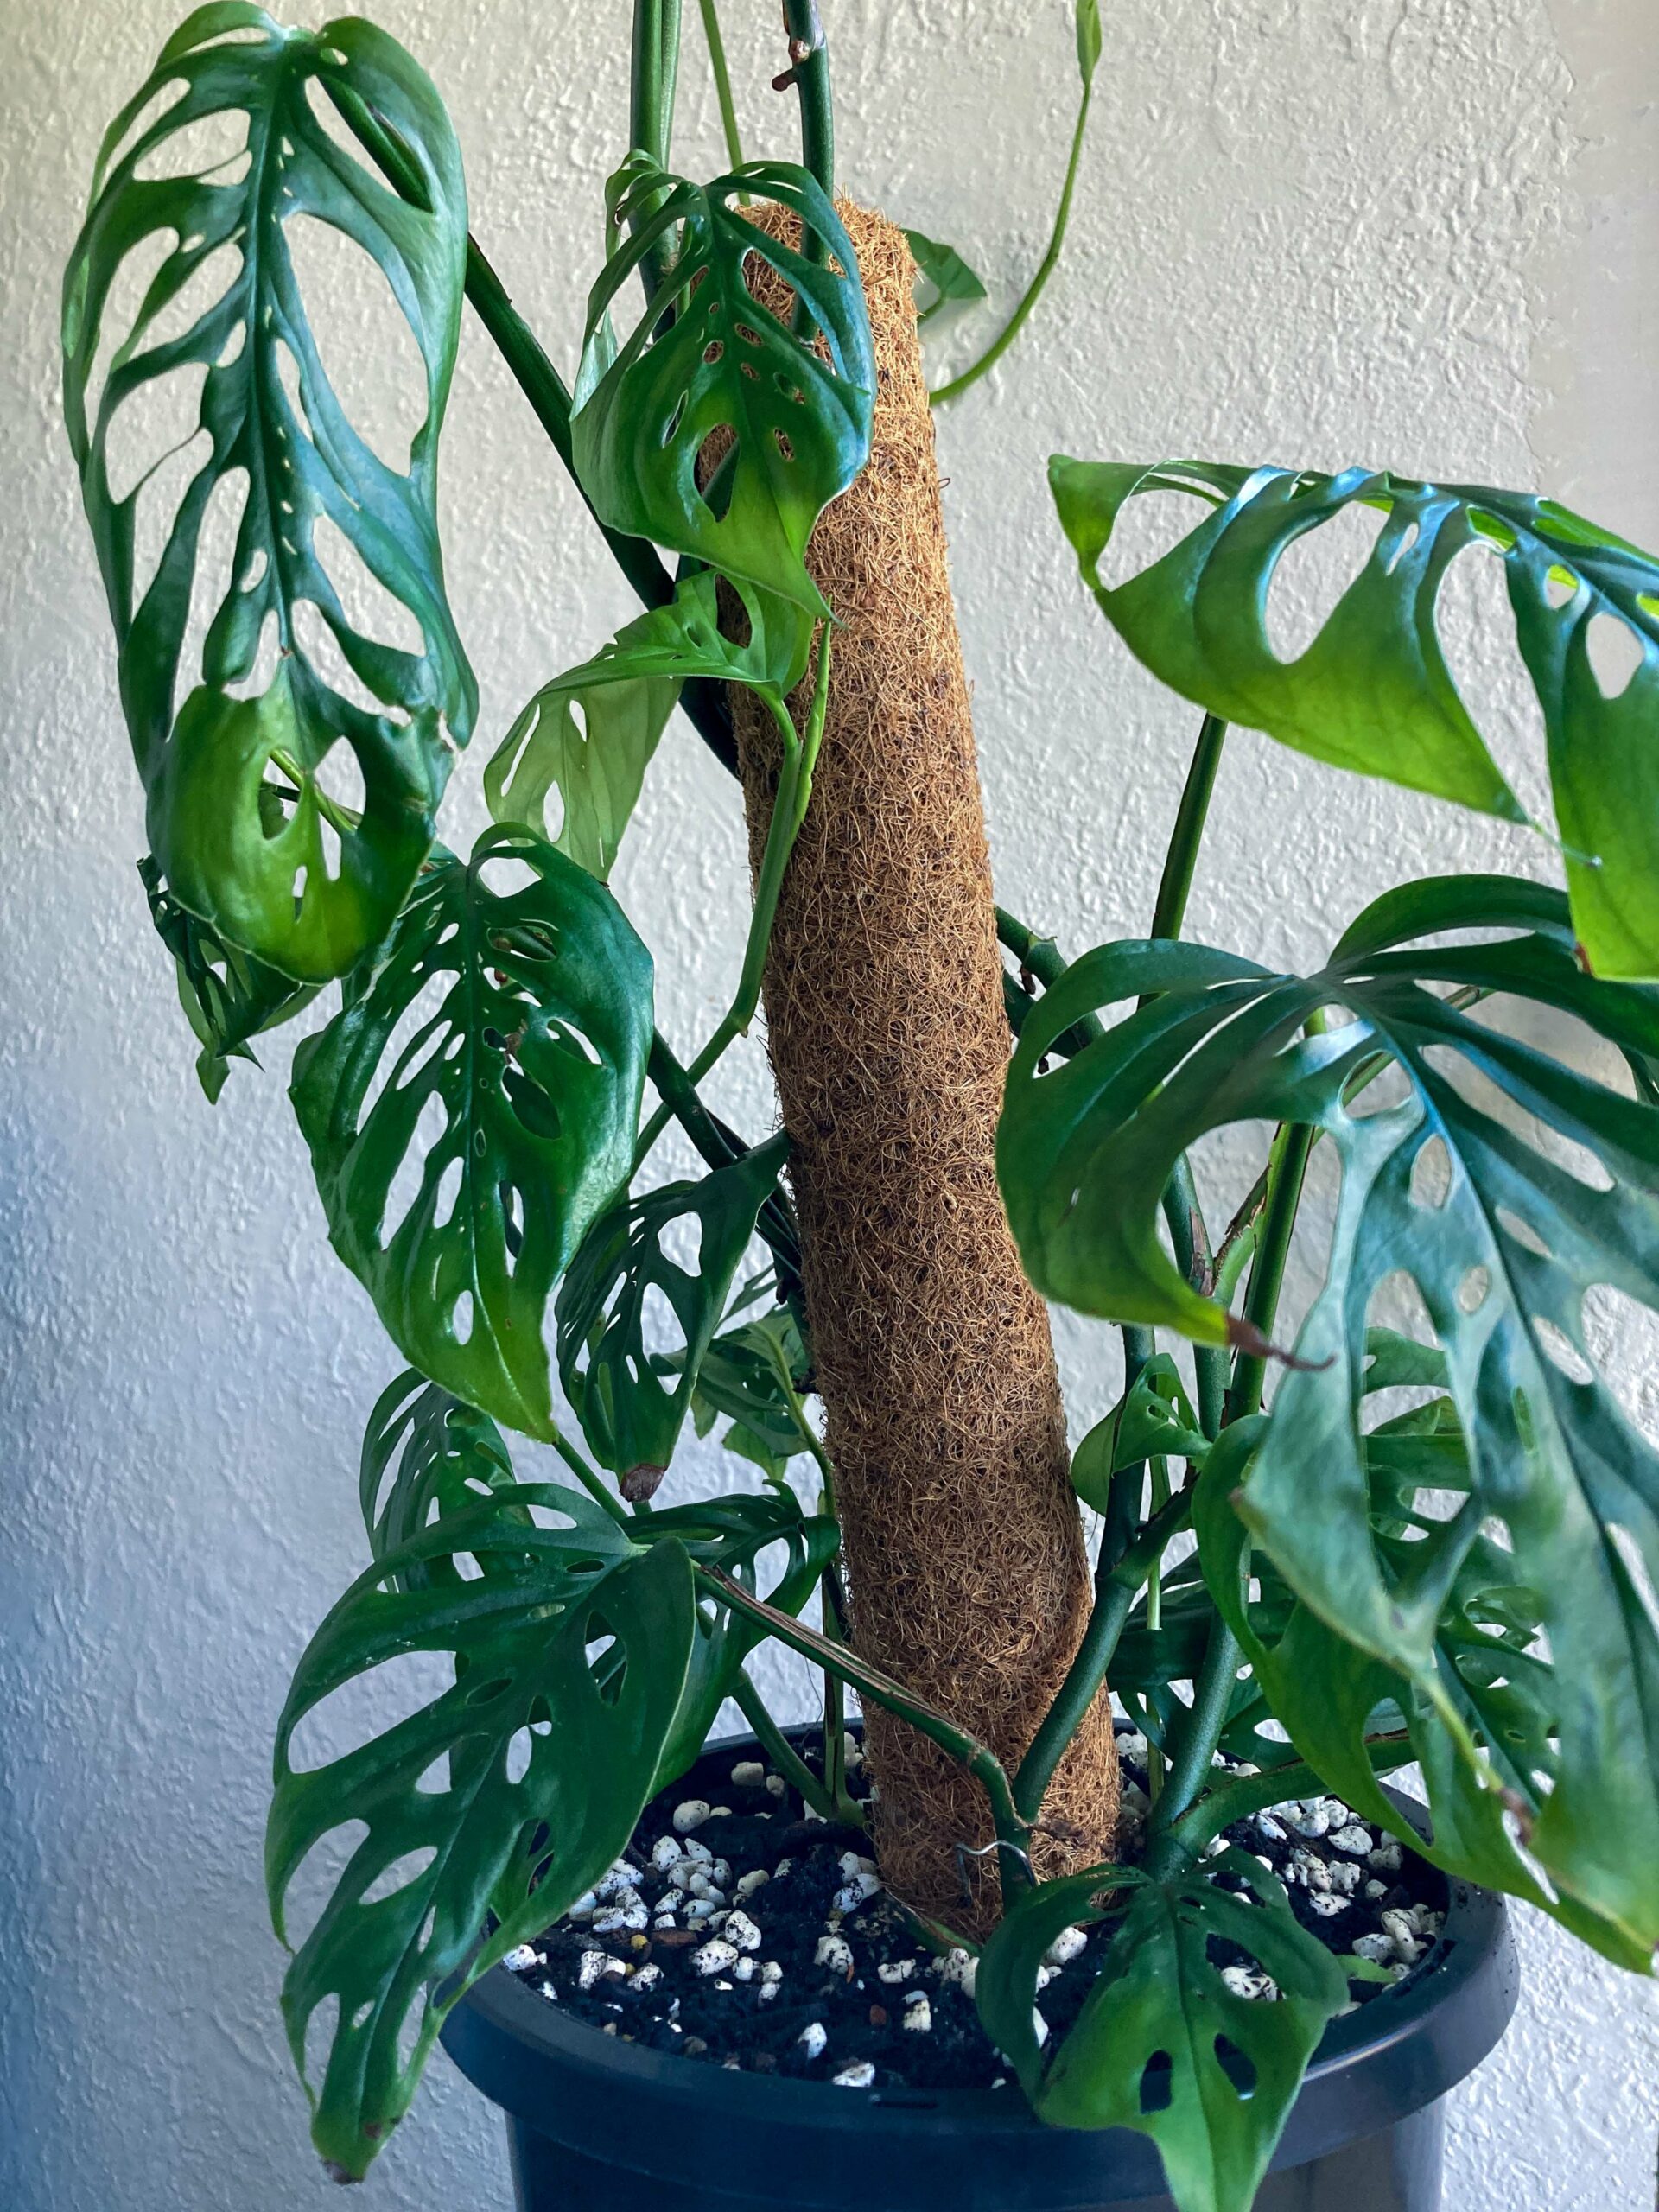 An indoor plant with large green holey leaves in a black plastic pot. The plant is loosely climbing a brown coir tube 